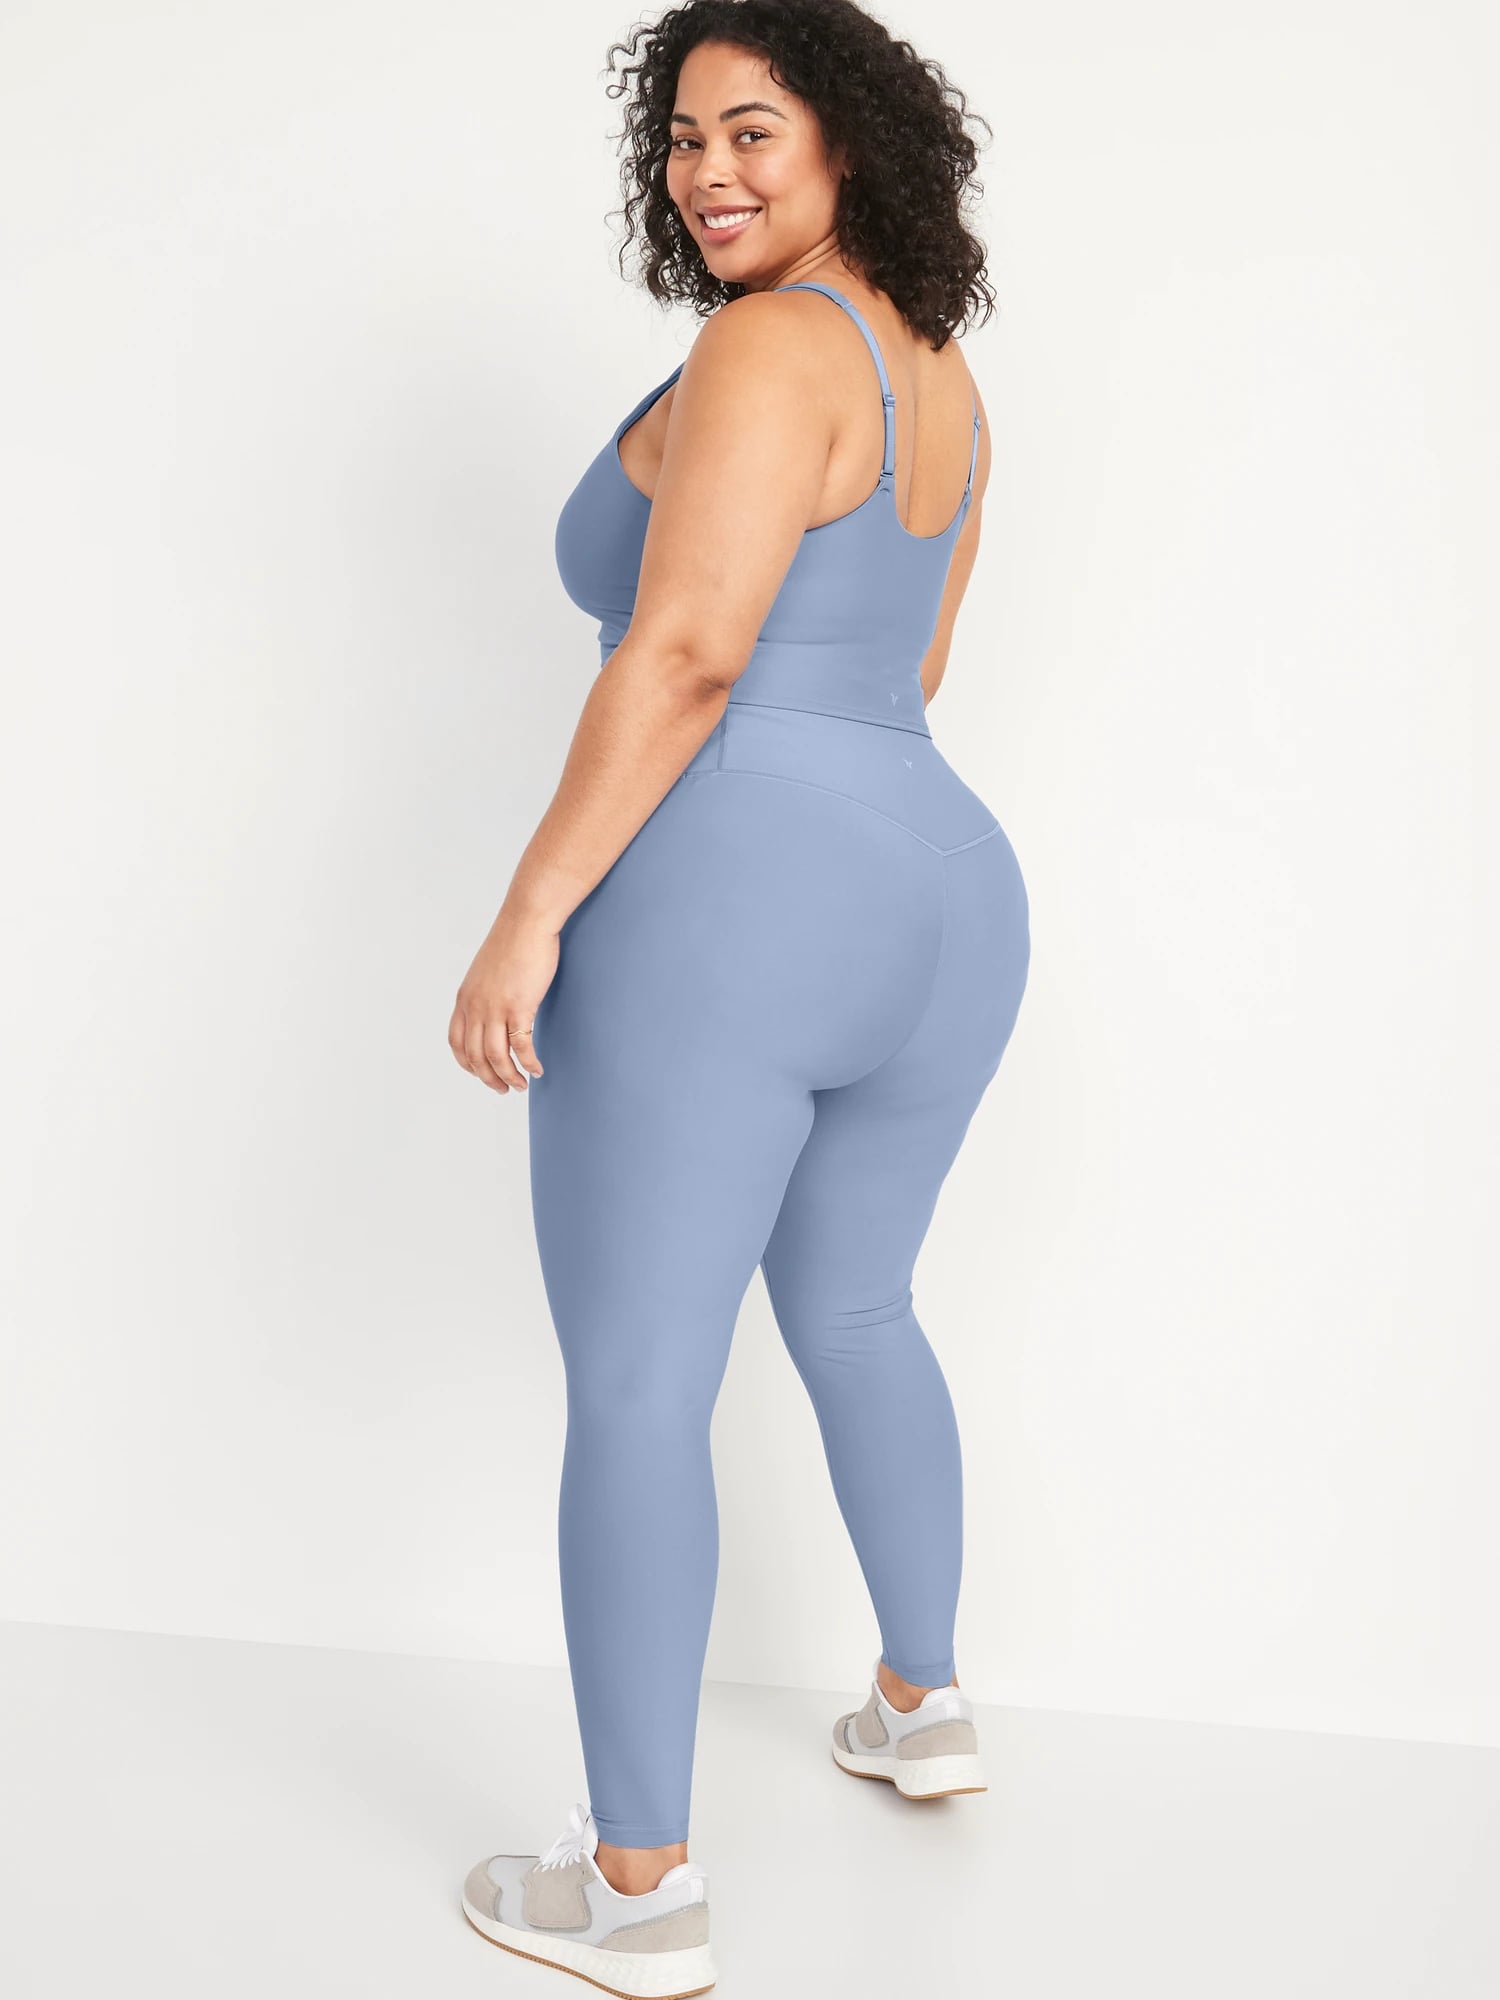 5 Plus-Size Workout Sets To Add To Your Activewear Wardrobe 